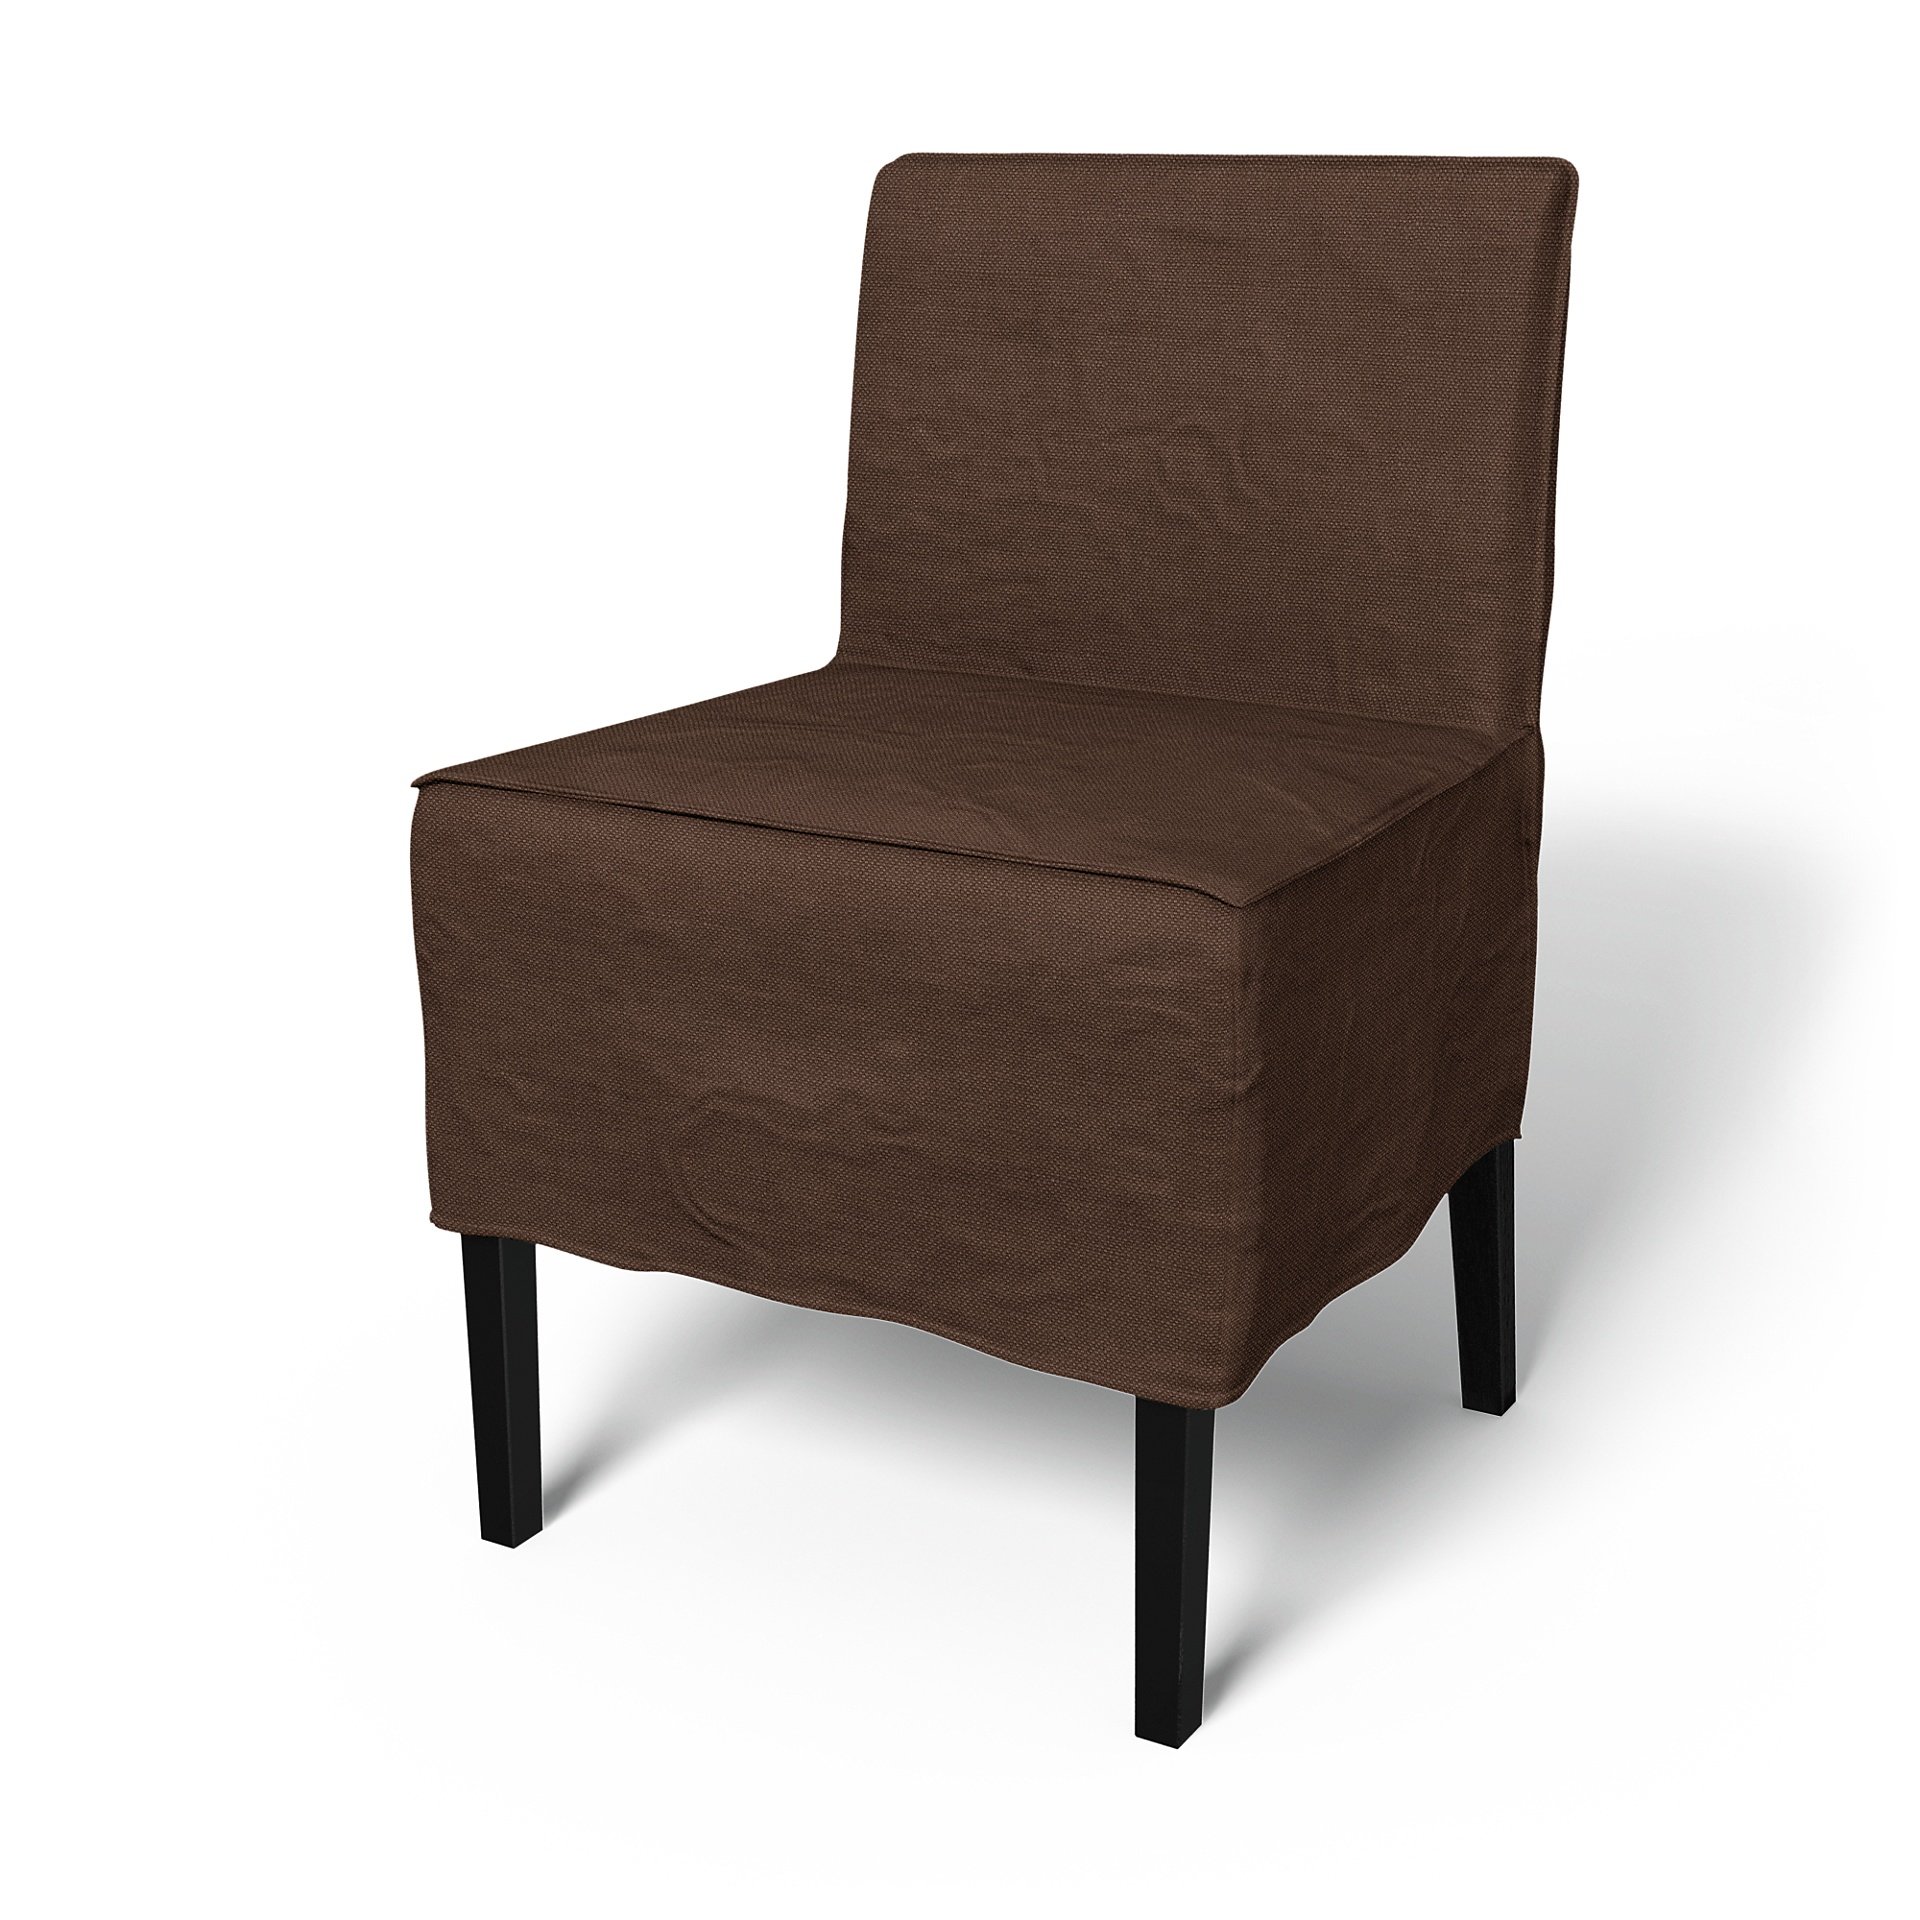 IKEA - Nils Dining Chair Cover, Chocolate, Linen - Bemz